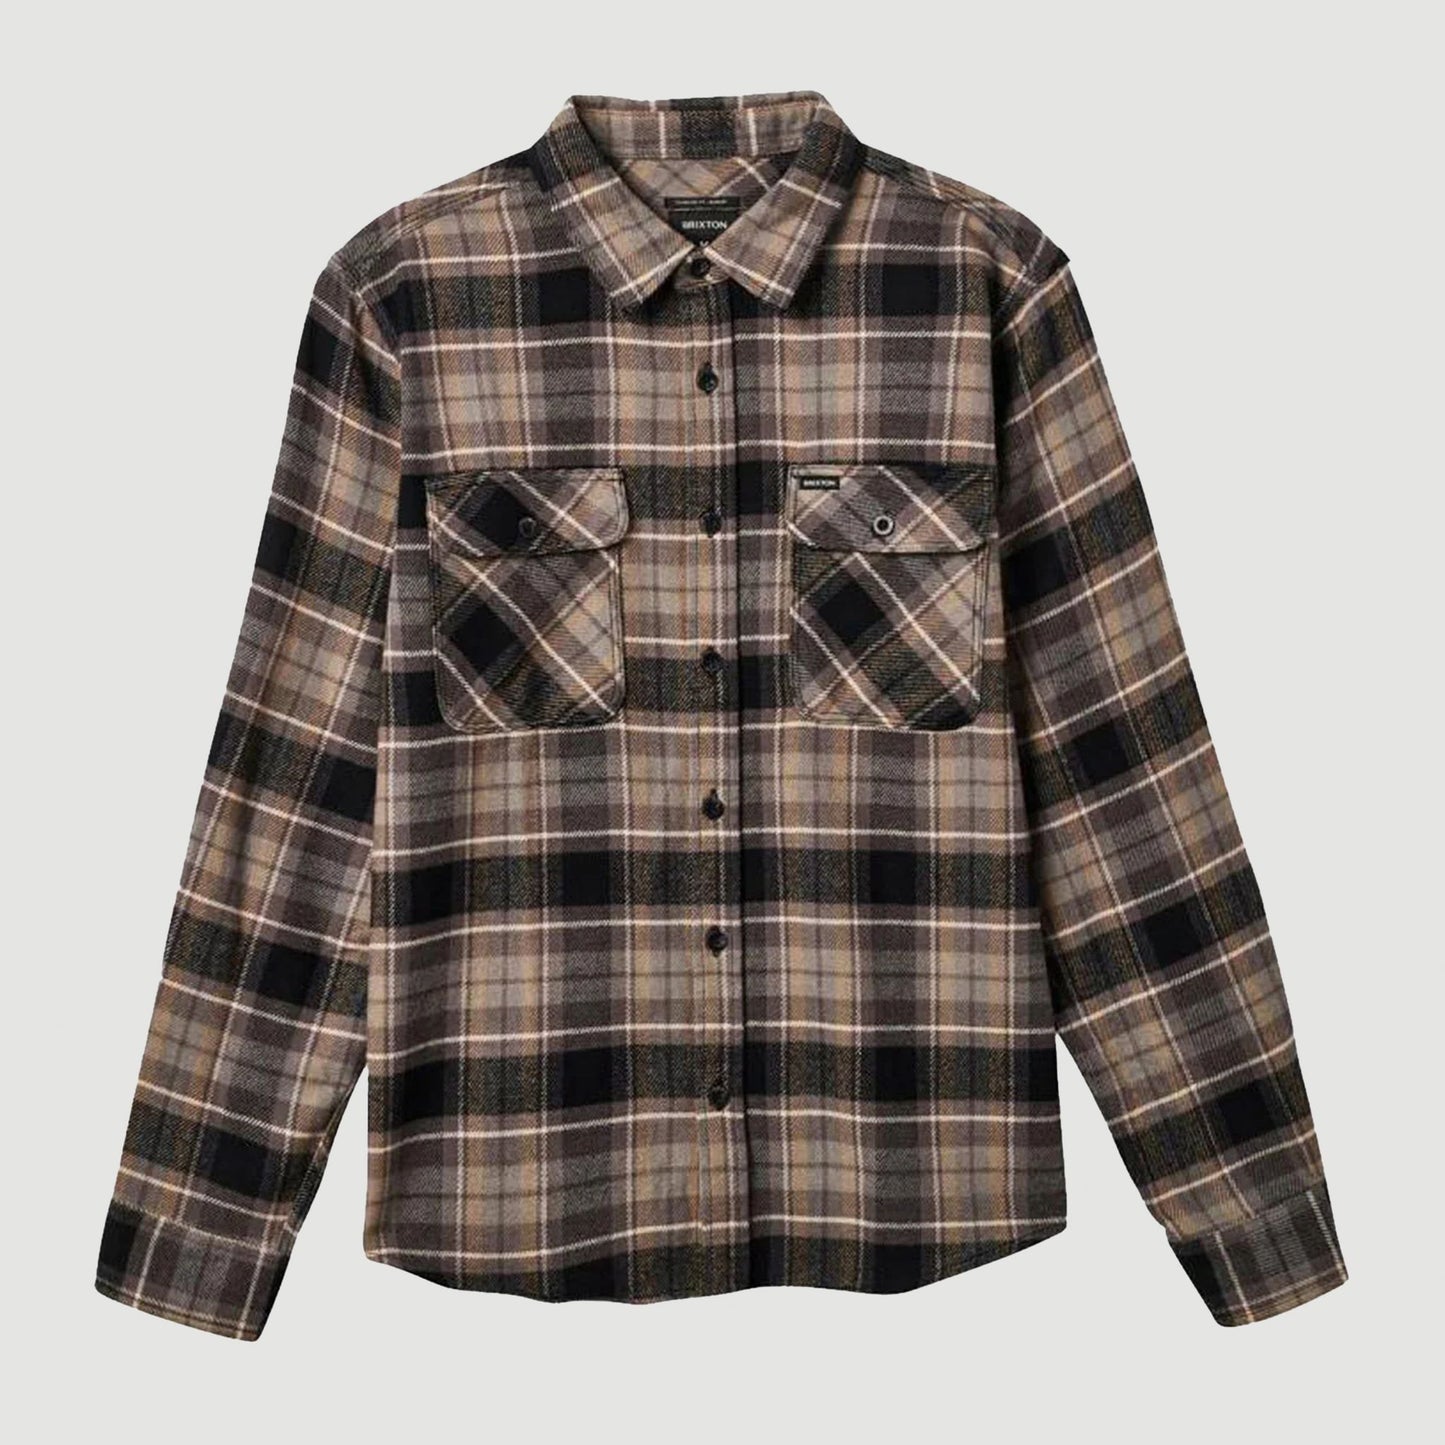 Brixton Bowery Flannel Black/Charcoal/Oatmeal